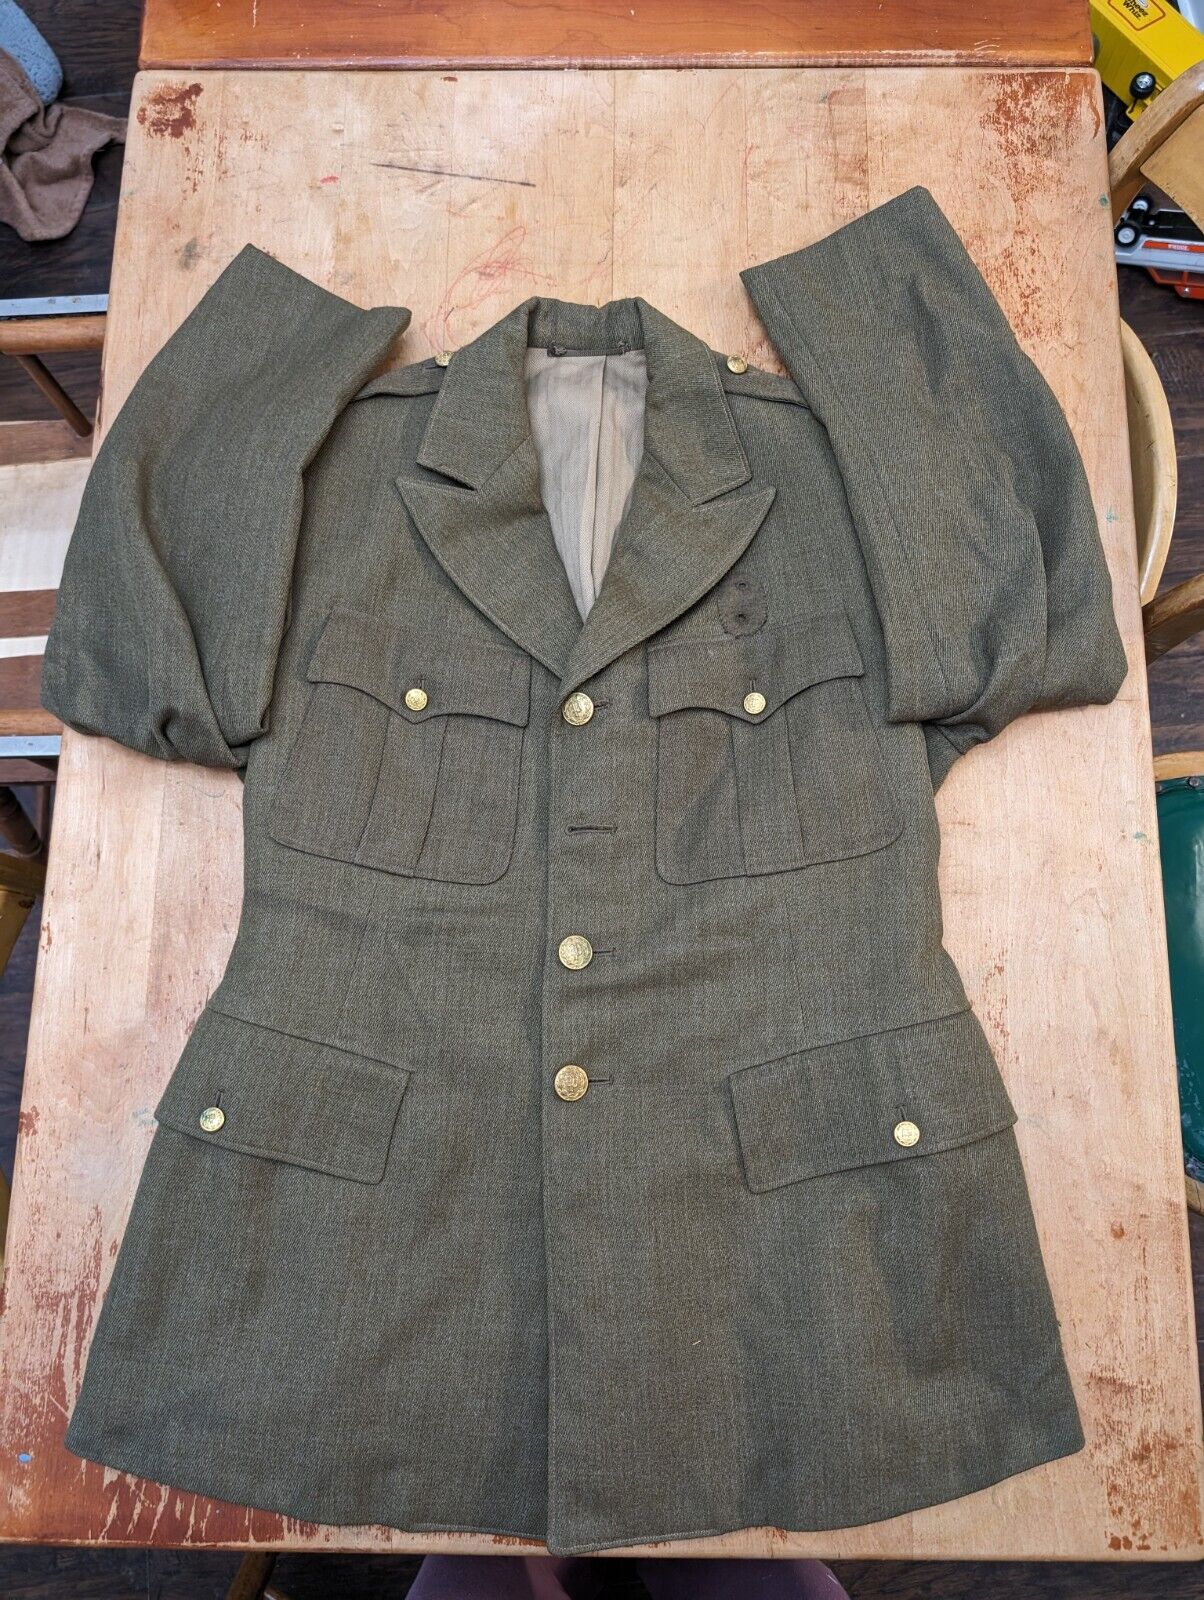 VTG Police Uniform Jacket Wool Metal Buttons Green Identified 1930s UGW Tag